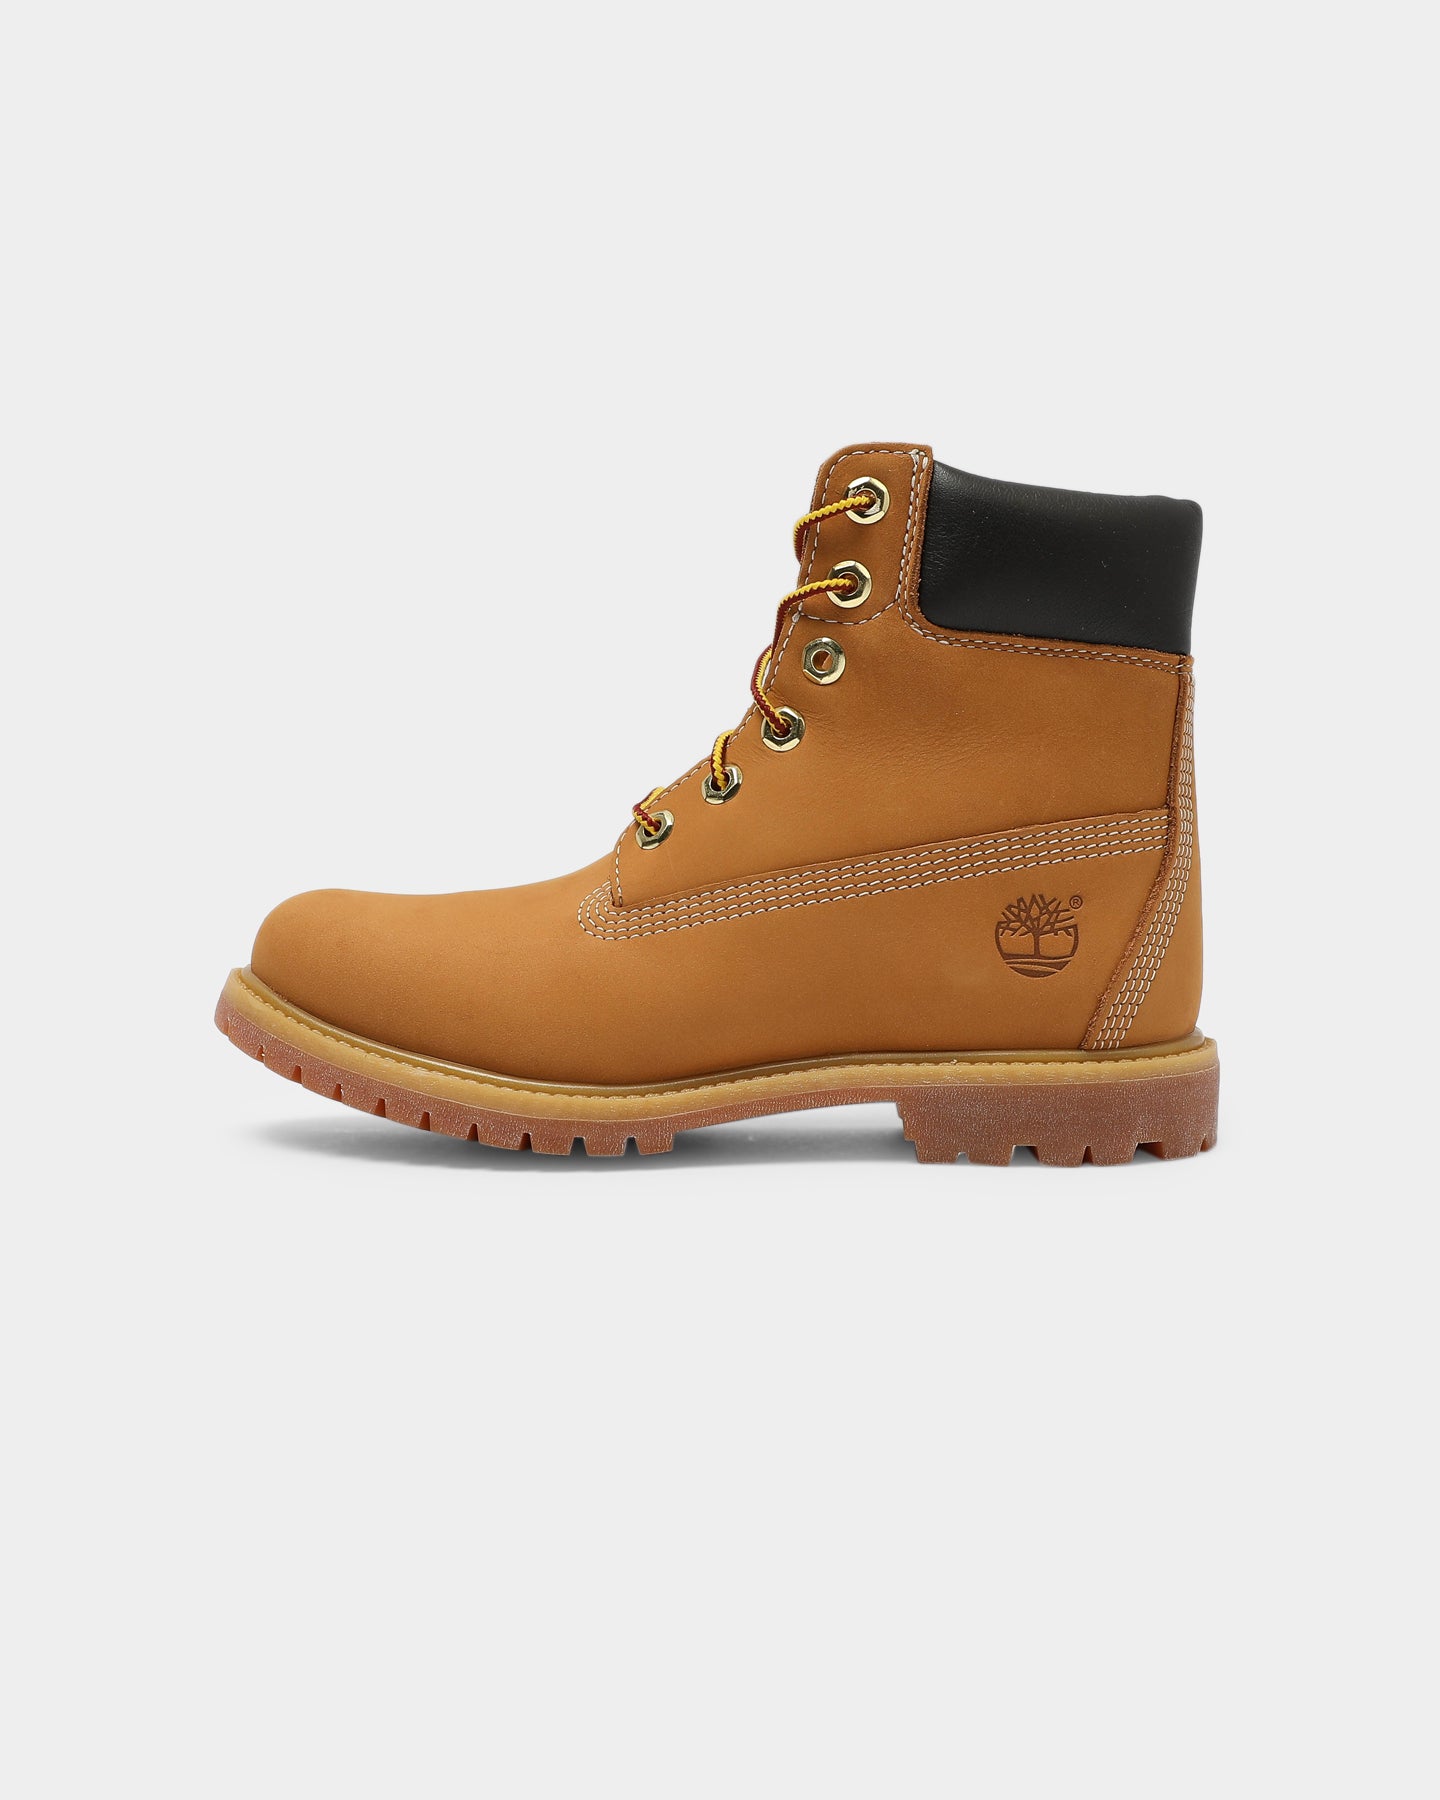 Timberland Womens Boots Wheat | Culture 